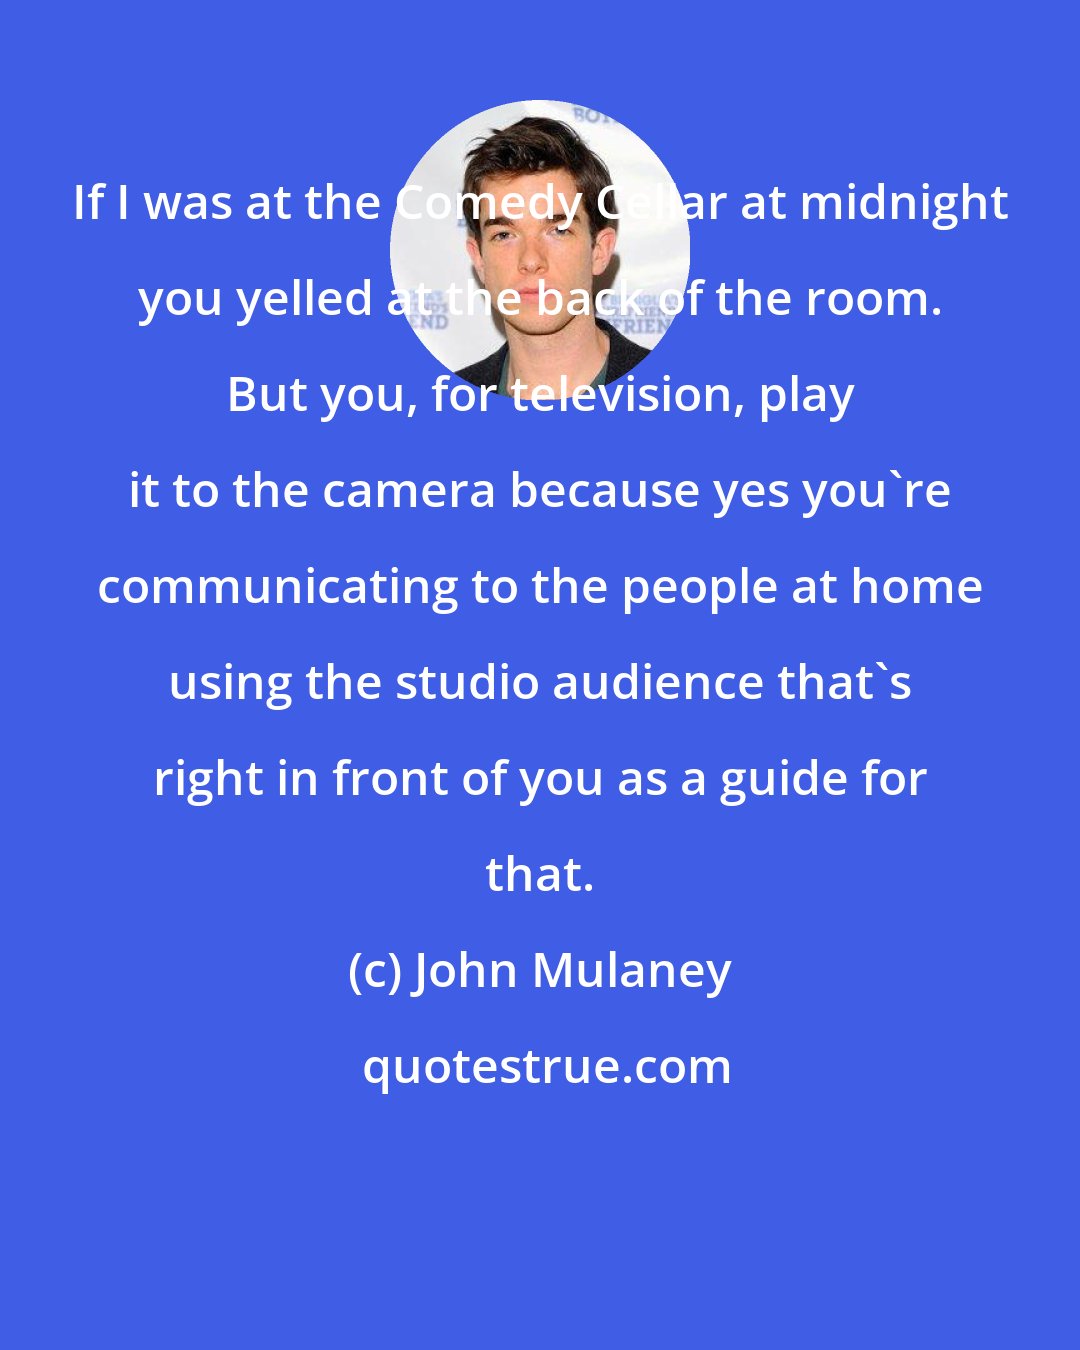 John Mulaney: If I was at the Comedy Cellar at midnight you yelled at the back of the room. But you, for television, play it to the camera because yes you're communicating to the people at home using the studio audience that's right in front of you as a guide for that.